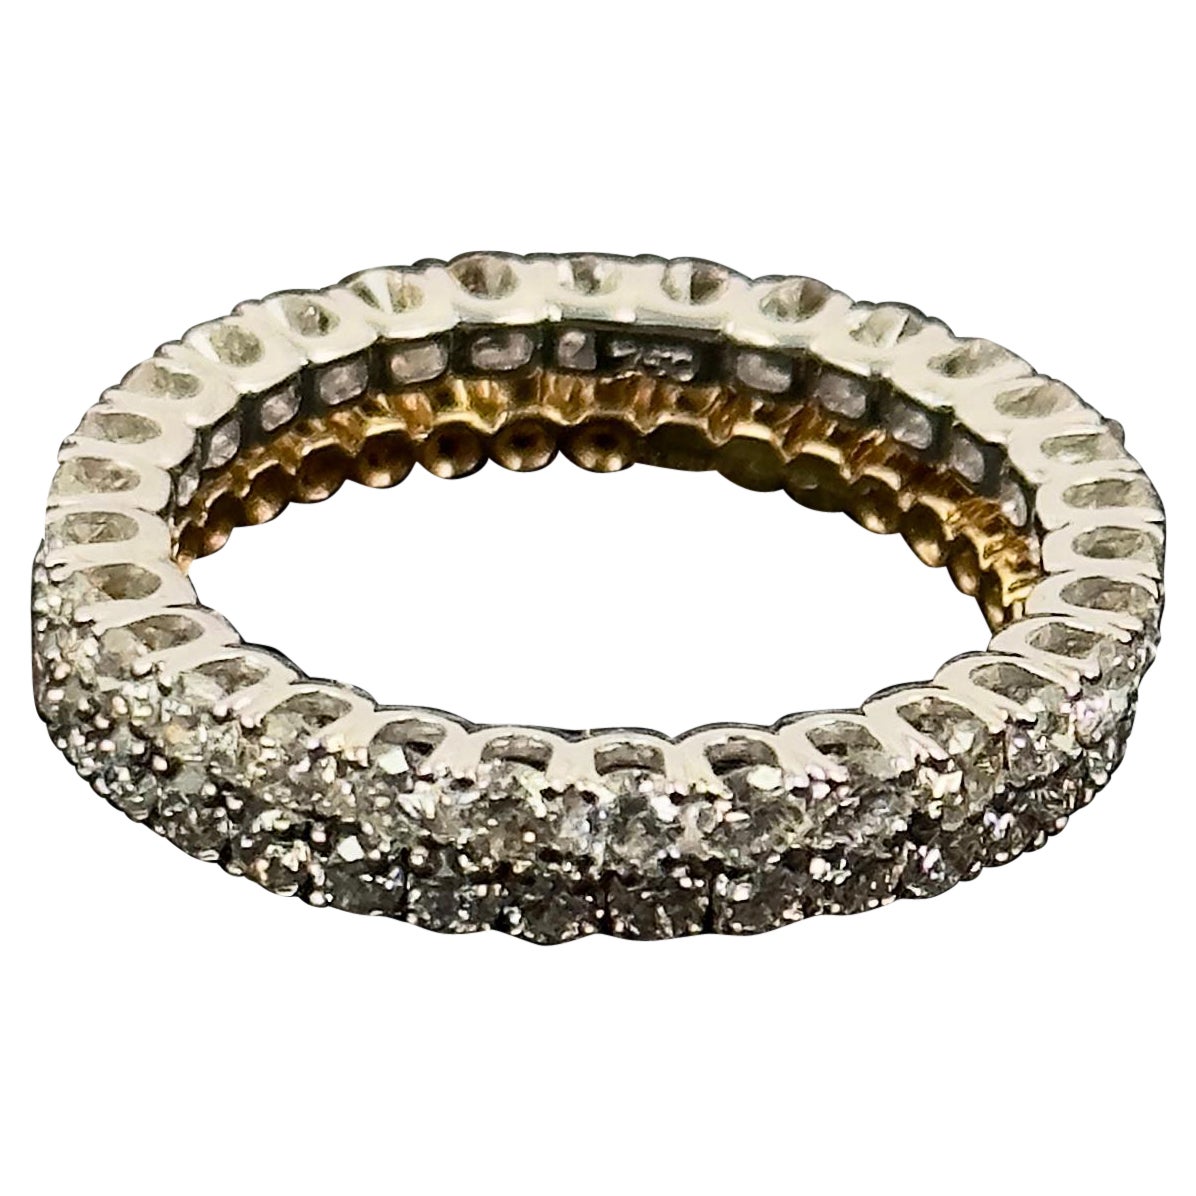 A couple of diamonds set in a couple of eternity style bands! Natural diamonds set in both white and yellow gold, the simple design is the best way to accessorize for a classy look! Round white diamonds are hand picked from a bigger parcel, then